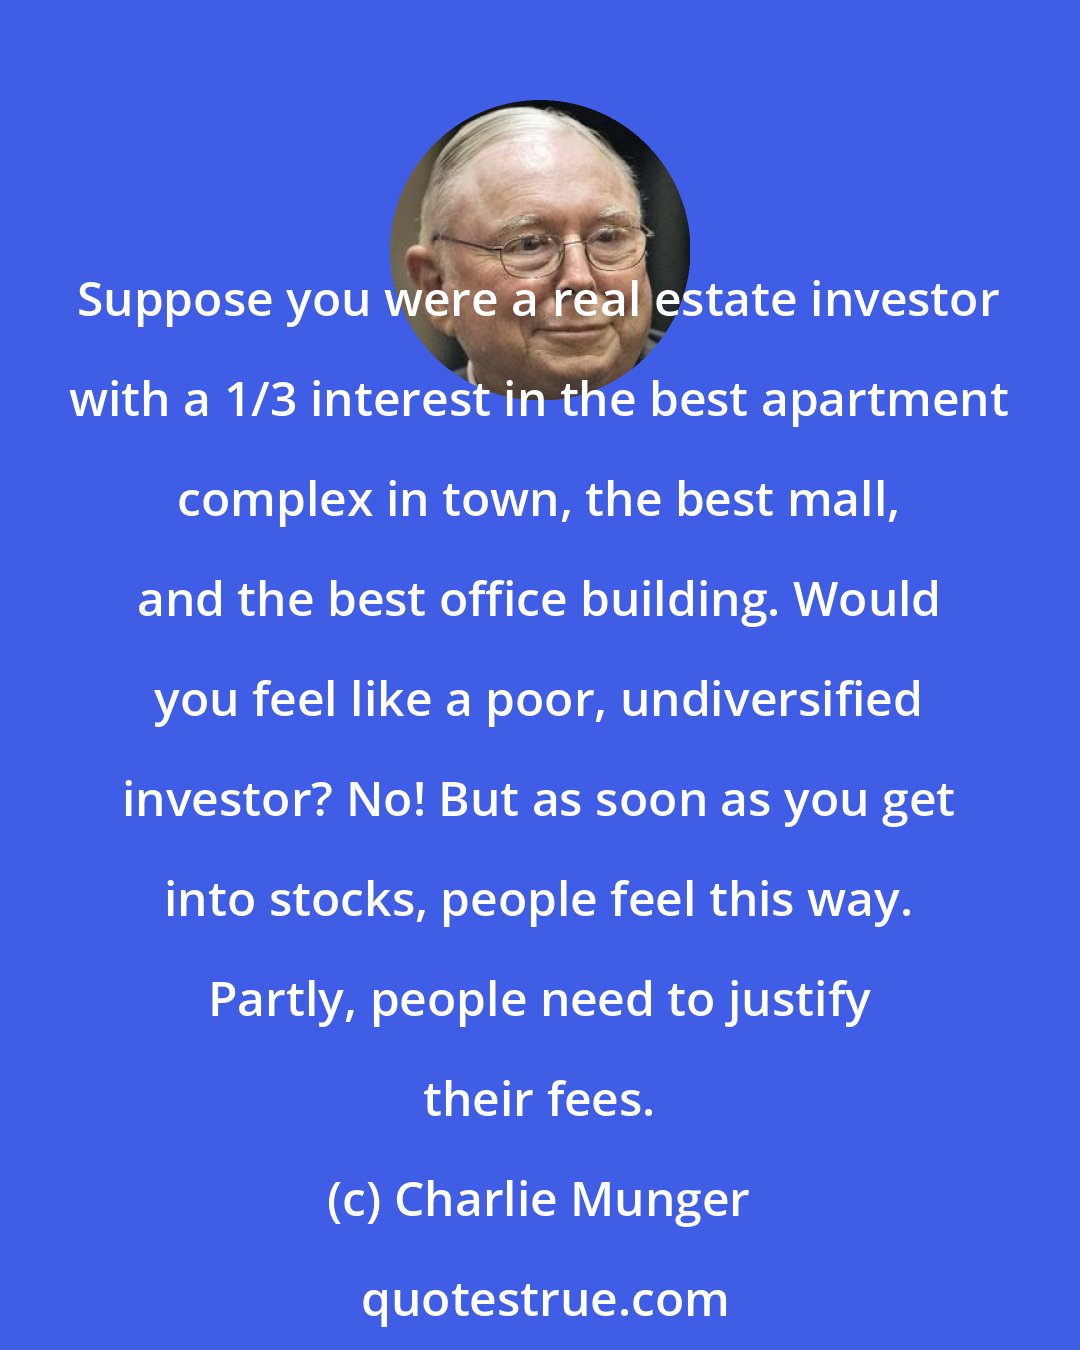 Charlie Munger: Suppose you were a real estate investor with a 1/3 interest in the best apartment complex in town, the best mall, and the best office building. Would you feel like a poor, undiversified investor? No! But as soon as you get into stocks, people feel this way. Partly, people need to justify their fees.